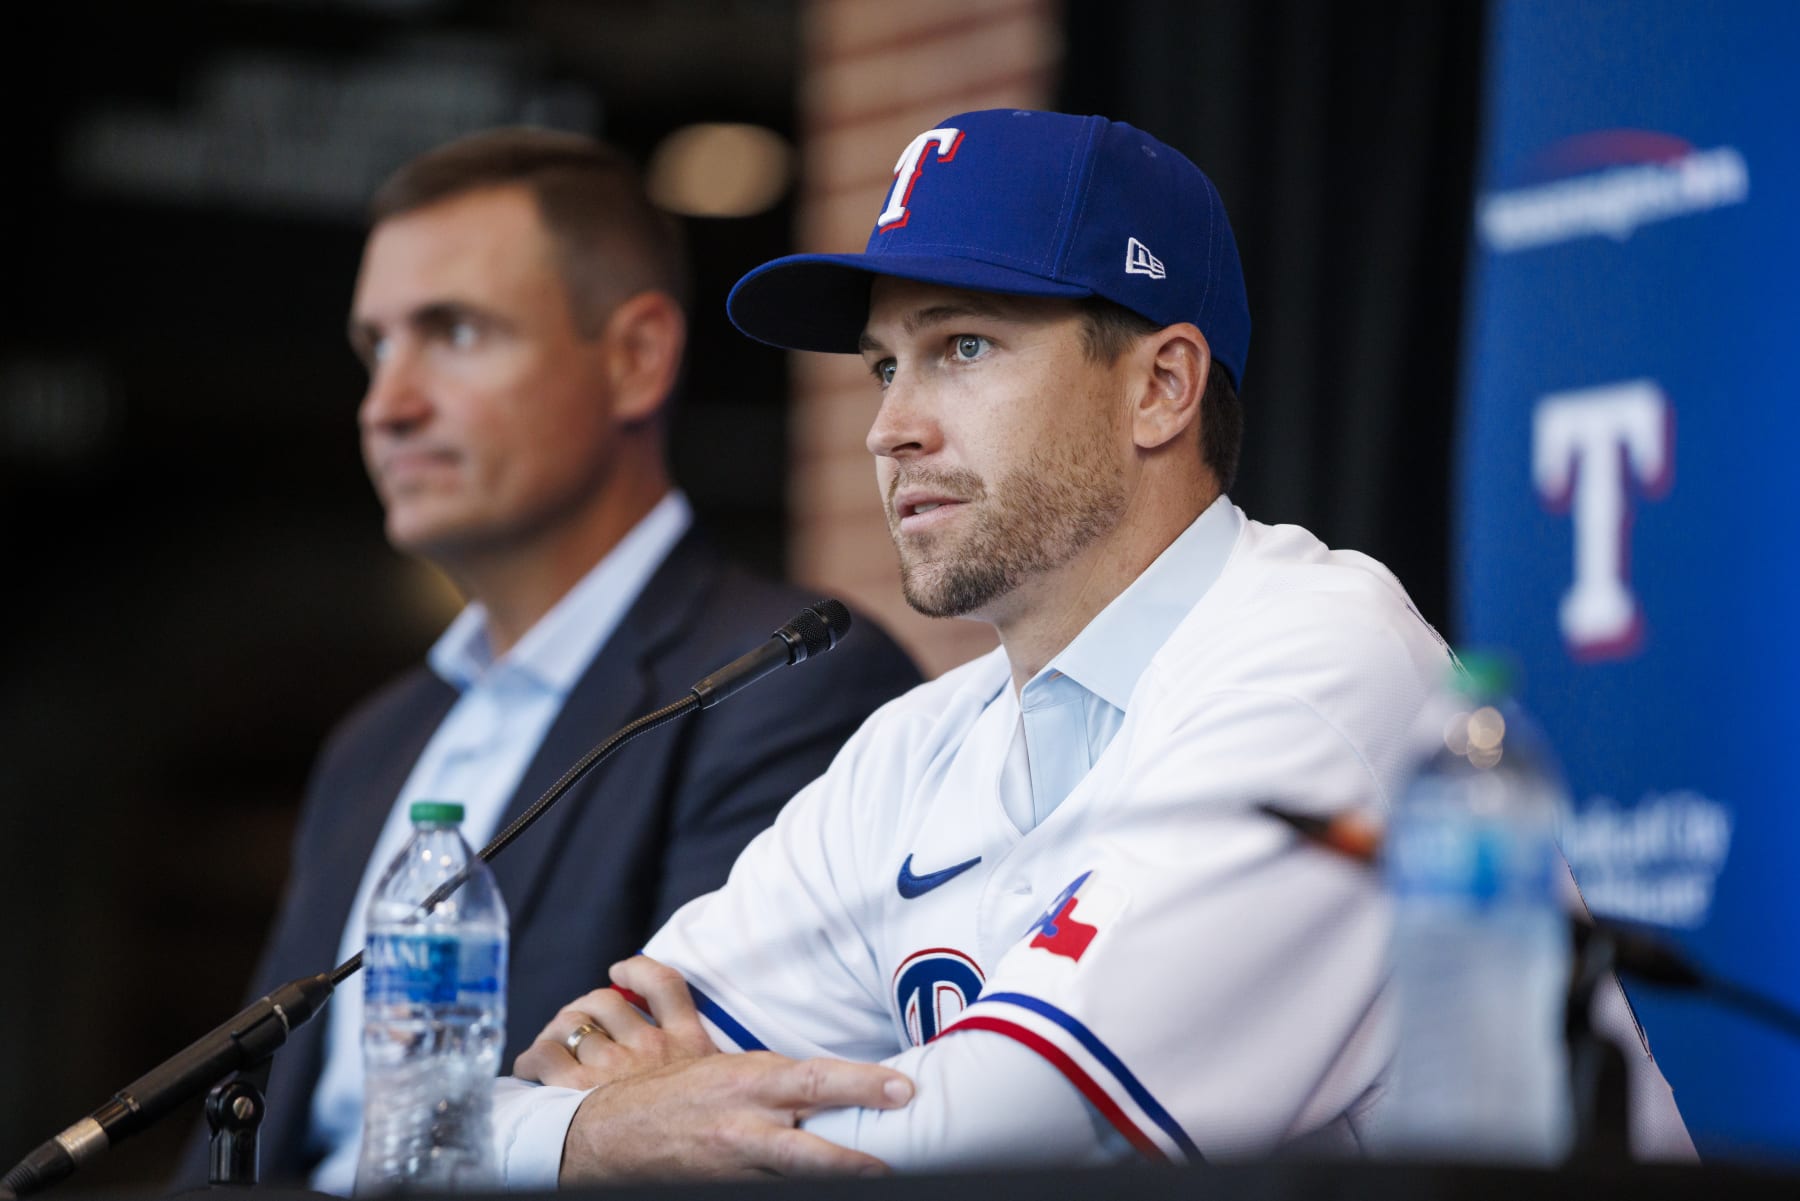 Rangers say deGrom is 'determined to succeed into his late 30s